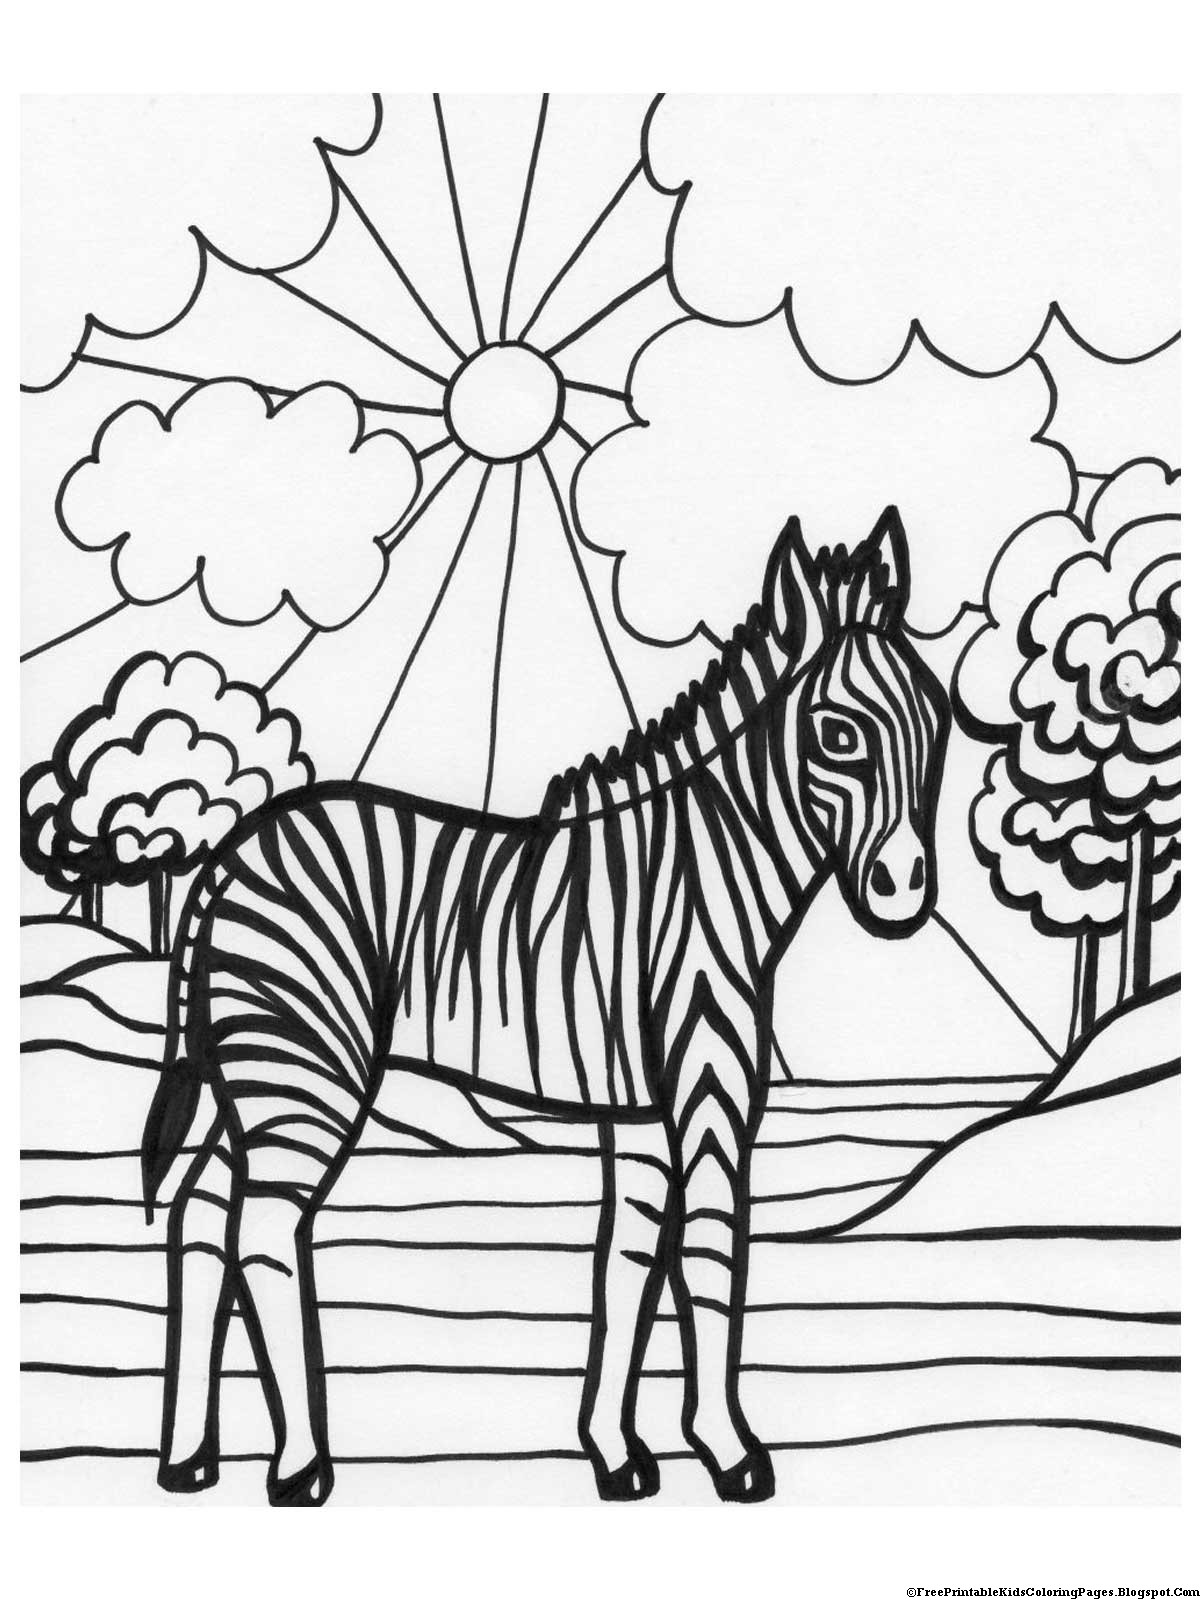 Zebra Coloring Pages Printable
 Zebra Coloring Pages Free Printable Kids Coloring Pages